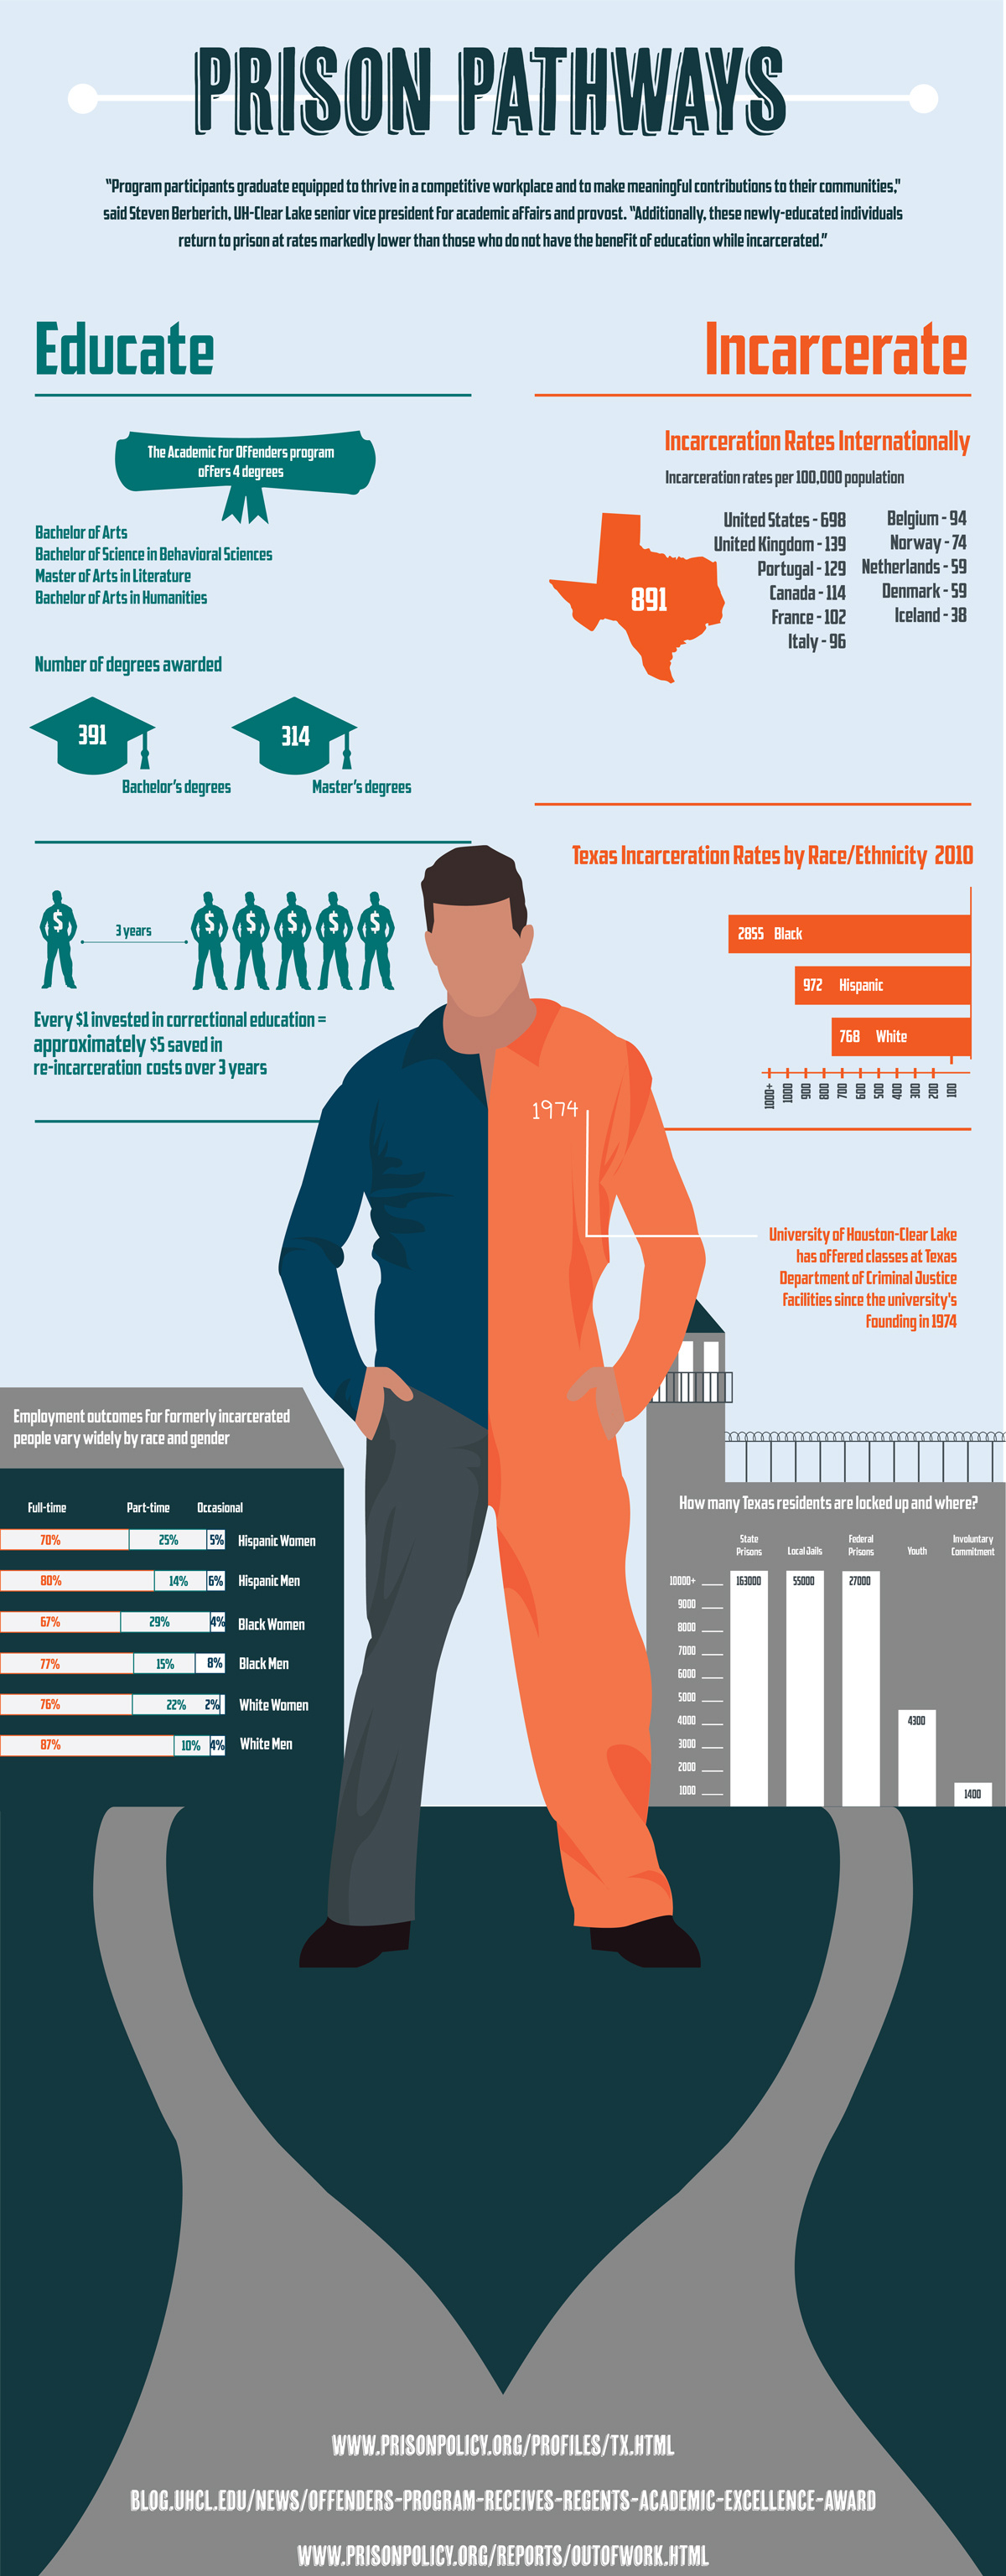 INFOGRAPHIC: Infographic depicting an incarcerated man and information regarding the relationship between education and incarceration. Infographic created by The Signal reporter Estefany Sanchez.